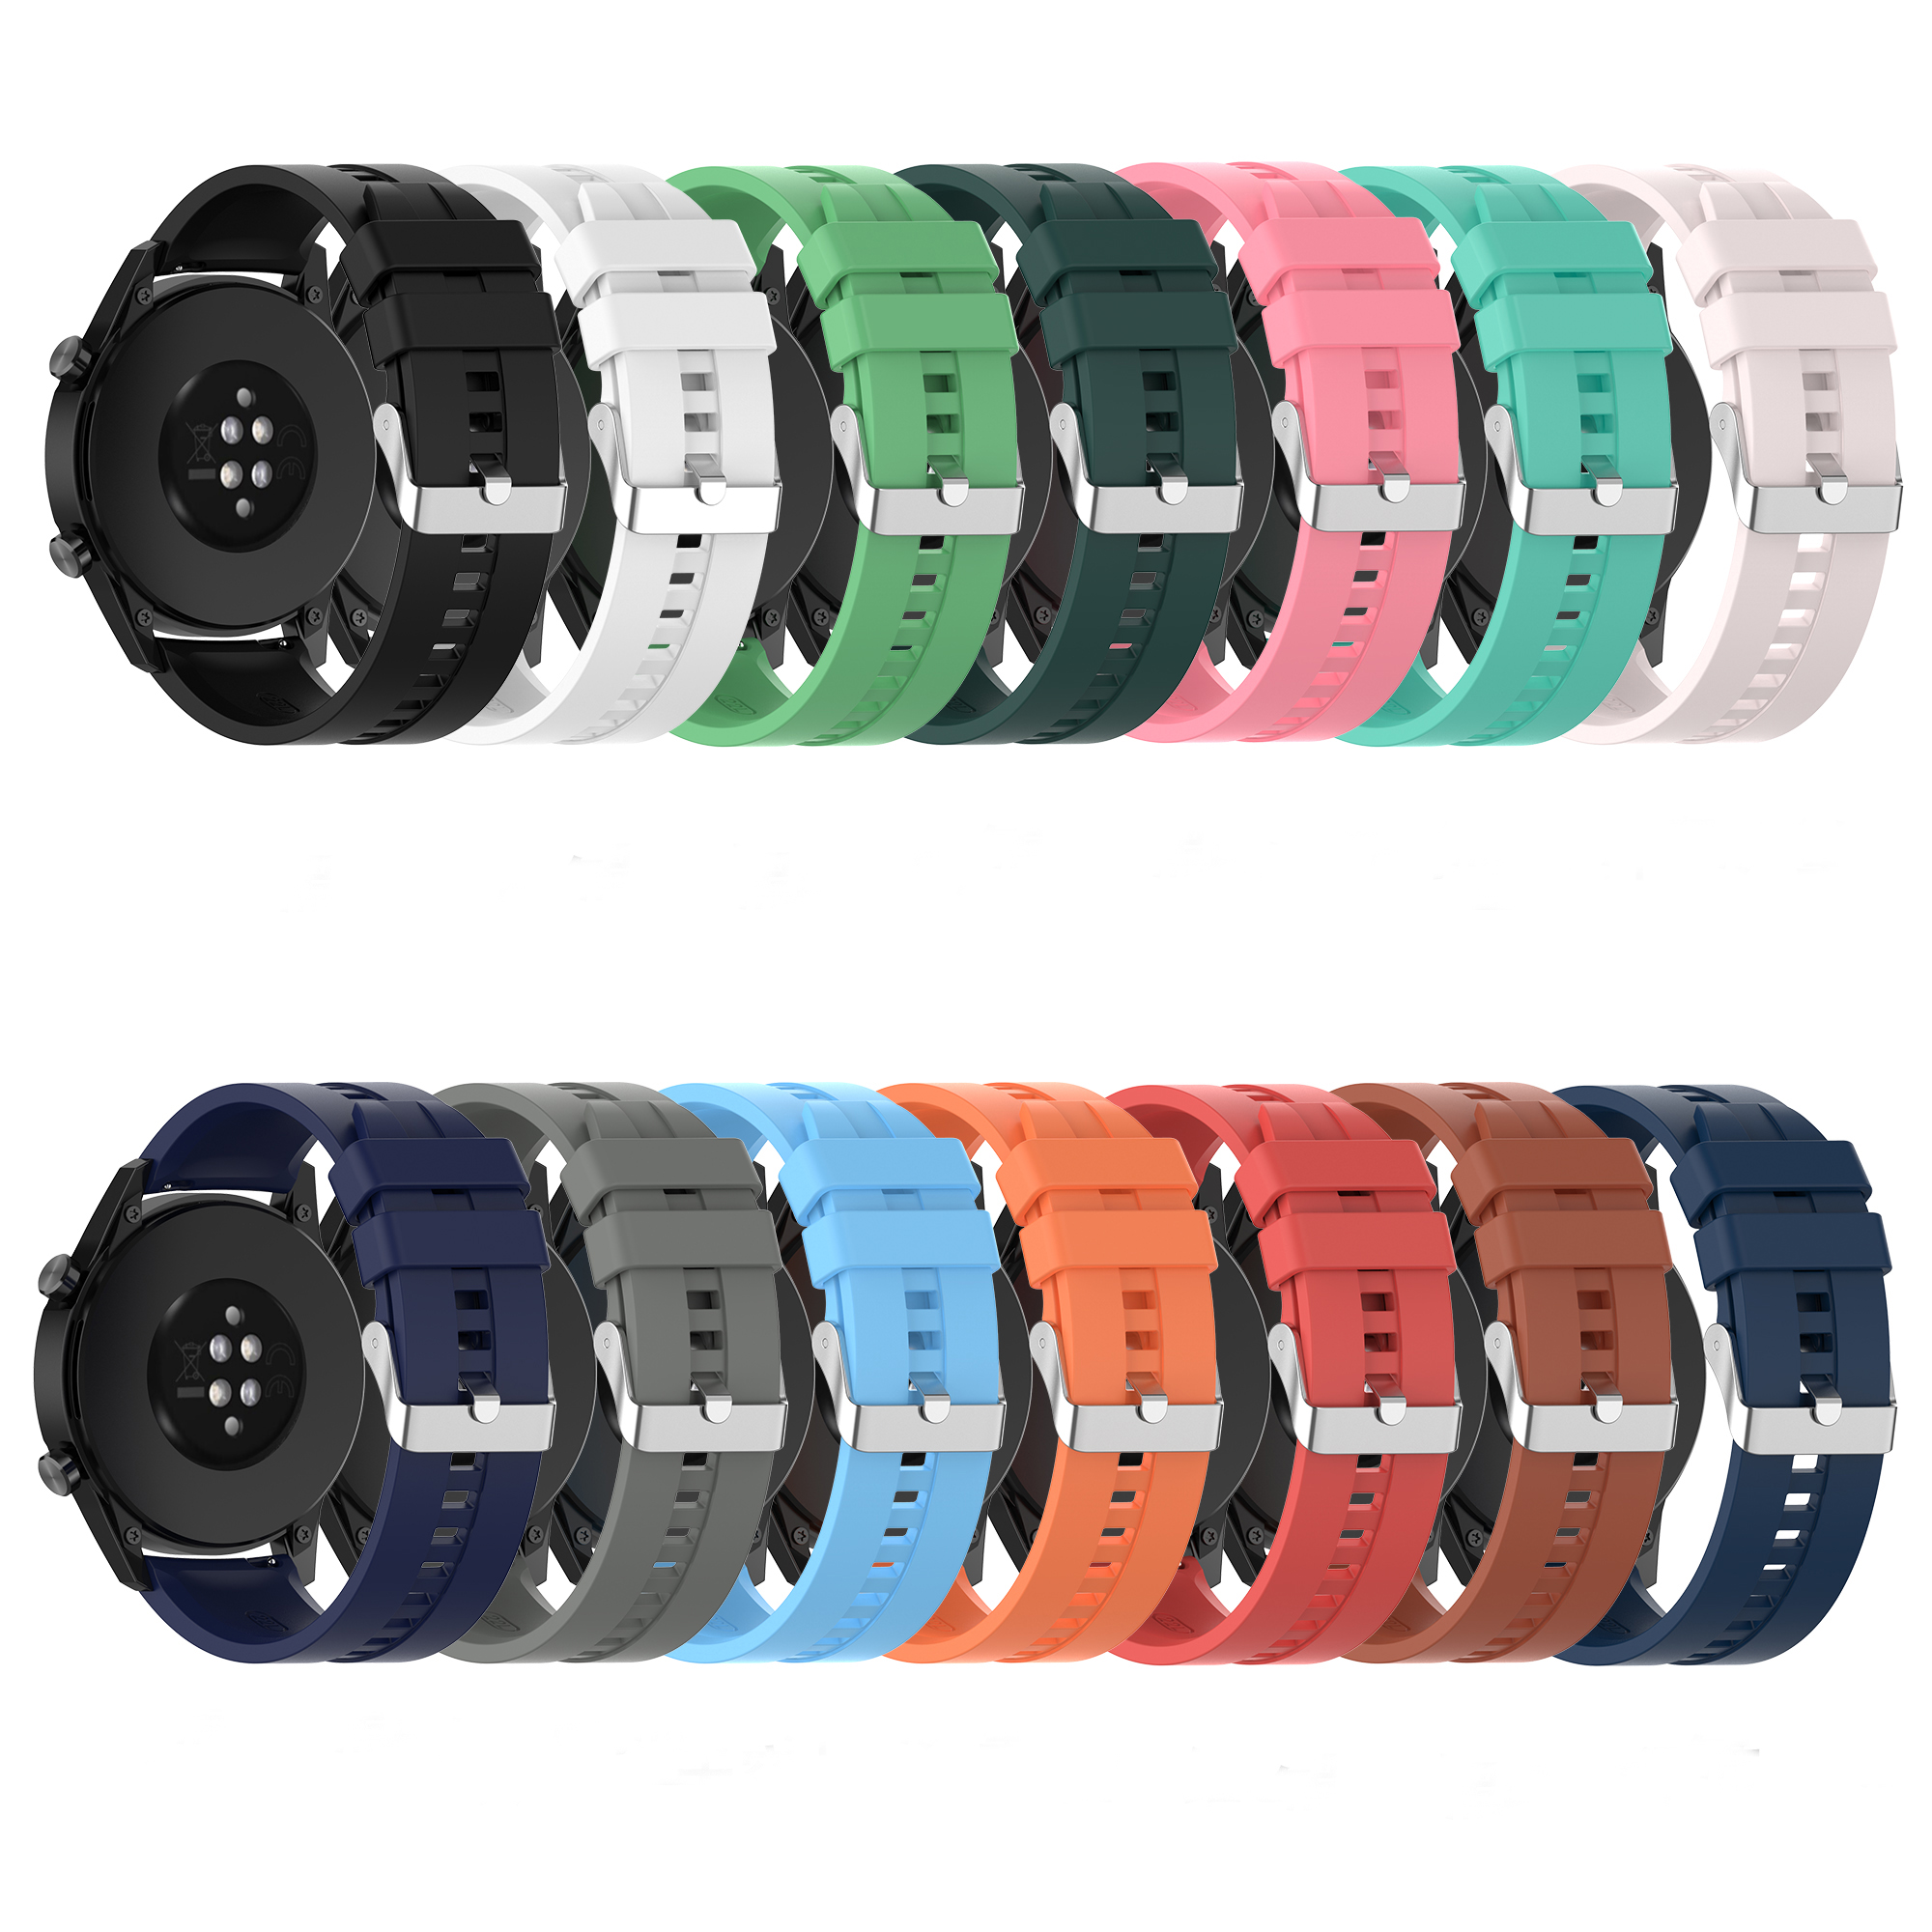 Bakeey-22mm-Multi-color-Silicone-Replacement-Strap-Smart-Watch-Band-For-Huawei-Watch-GT2-46MMGT2-Pro-1800244-2